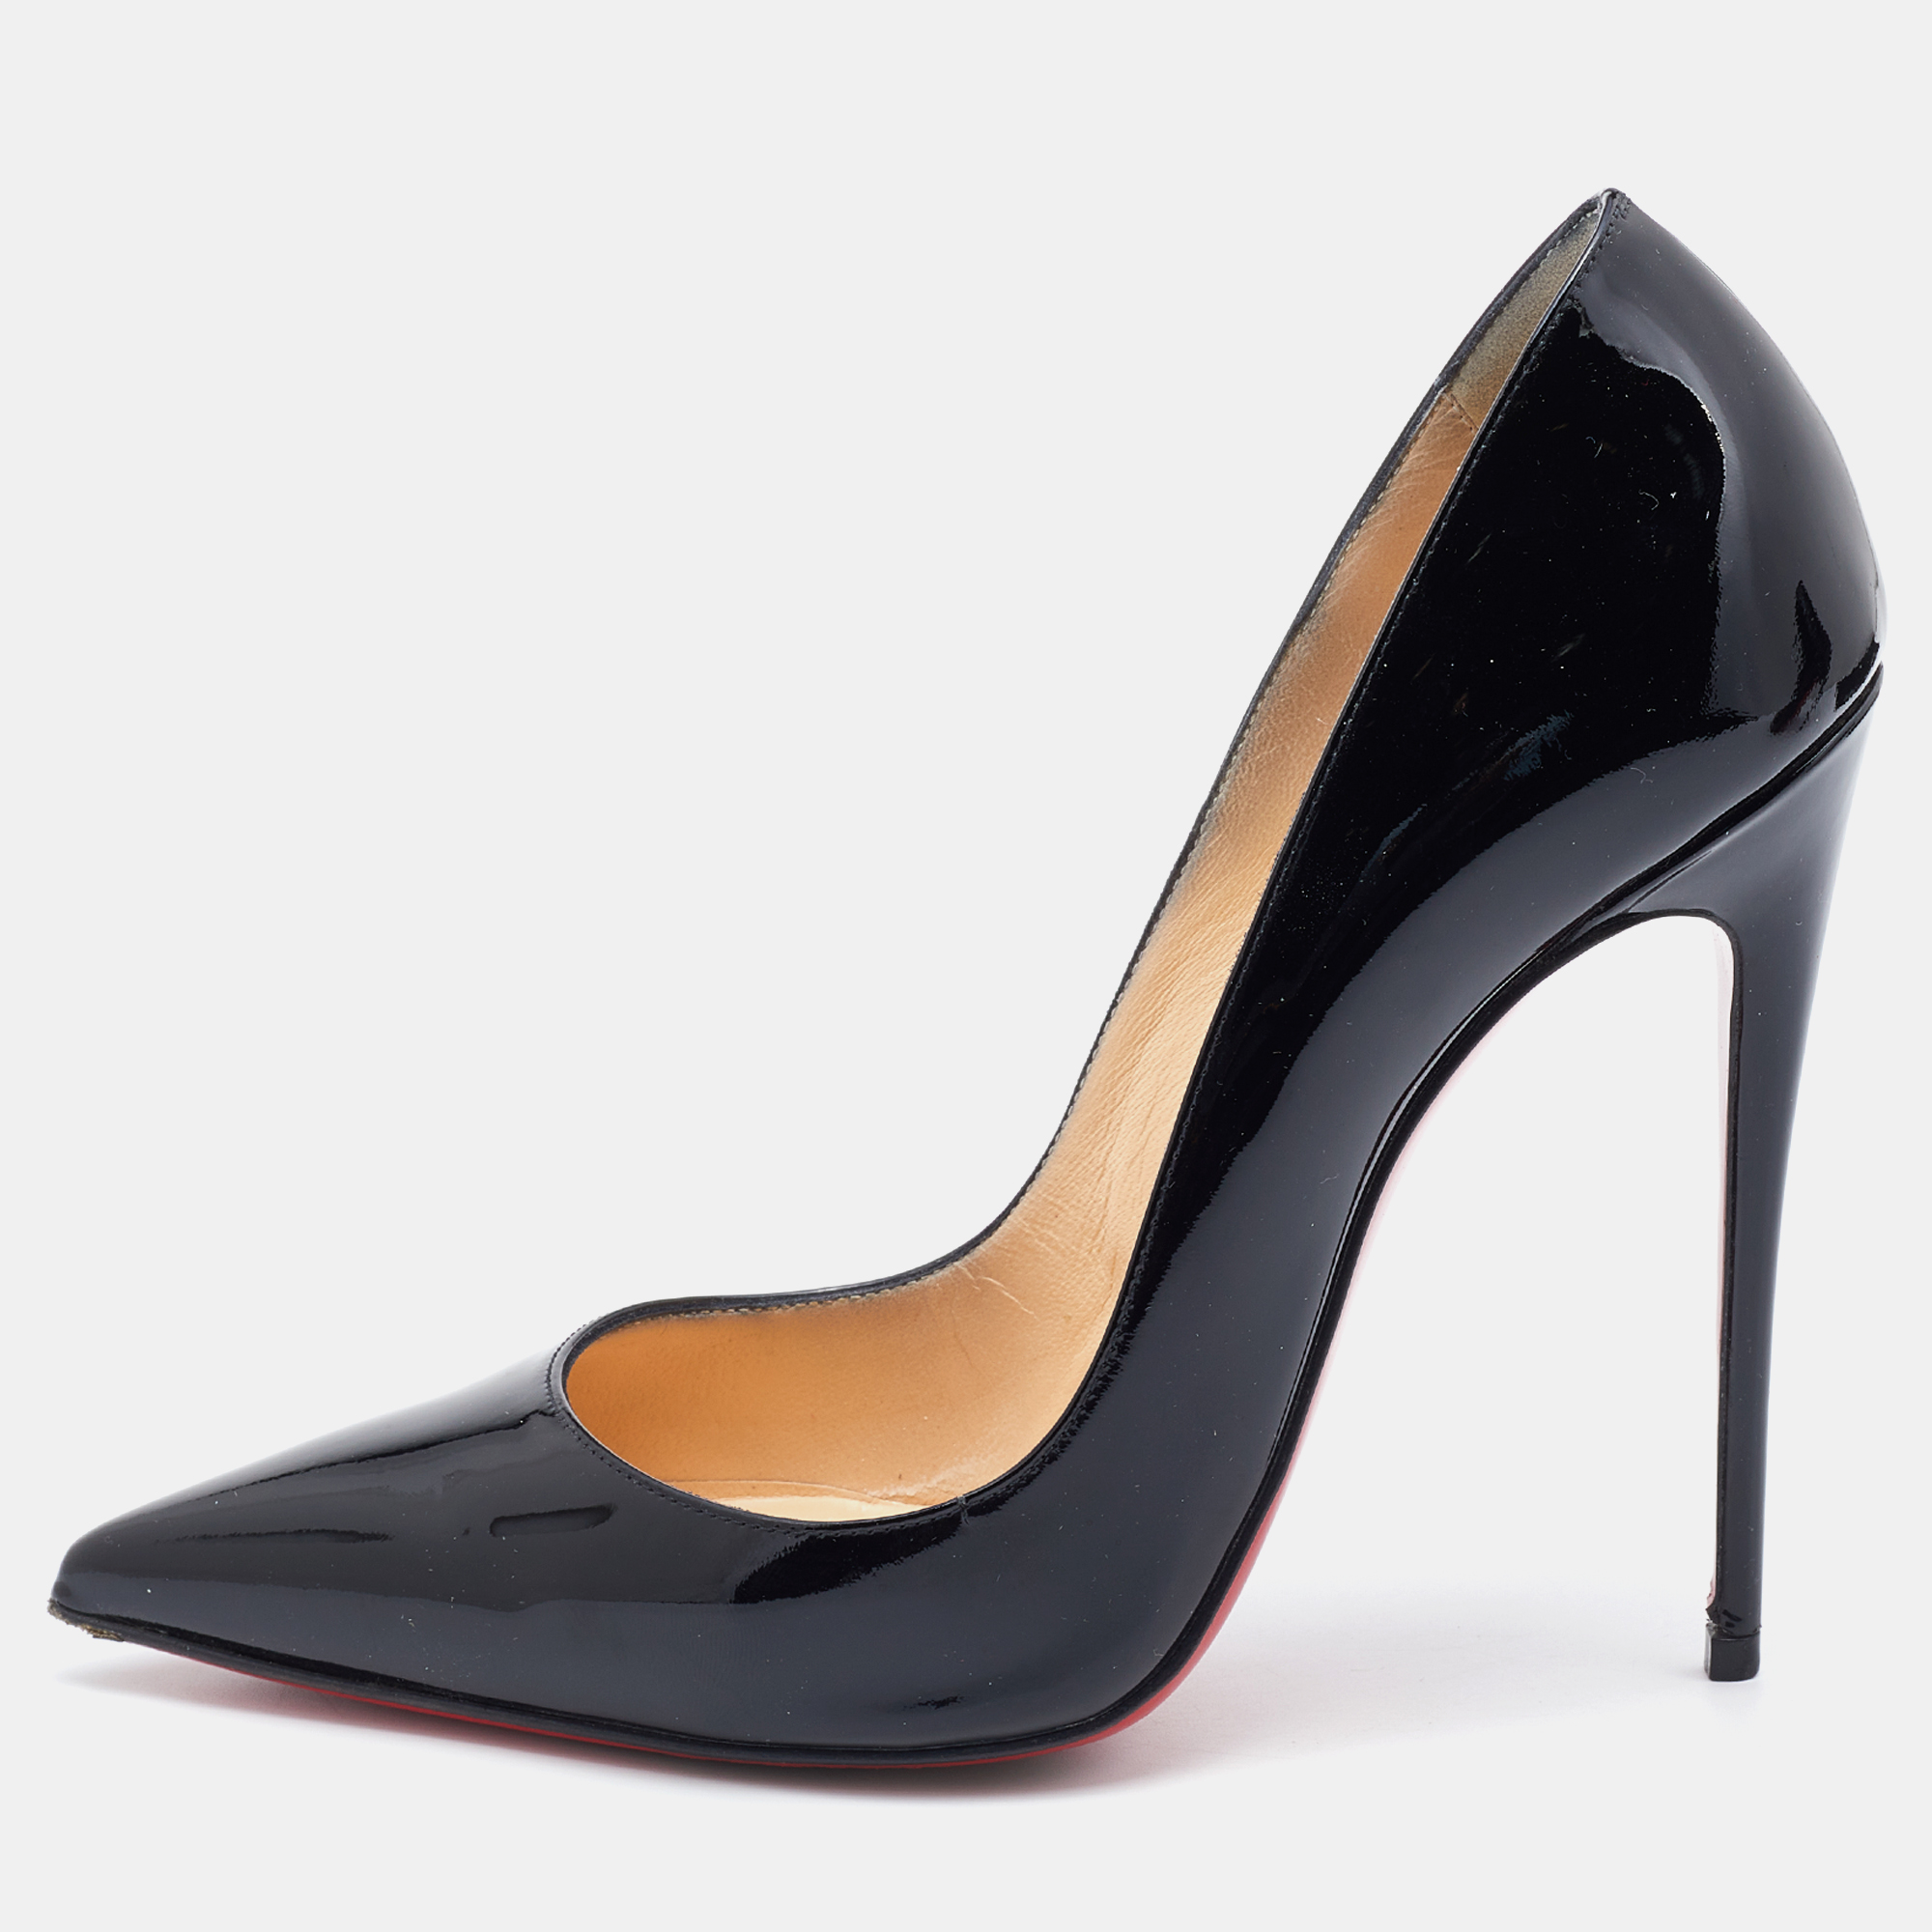 Pre-owned Christian Louboutin Black Patent Leather So Kate Pointed Toe Pumps Size 38.5